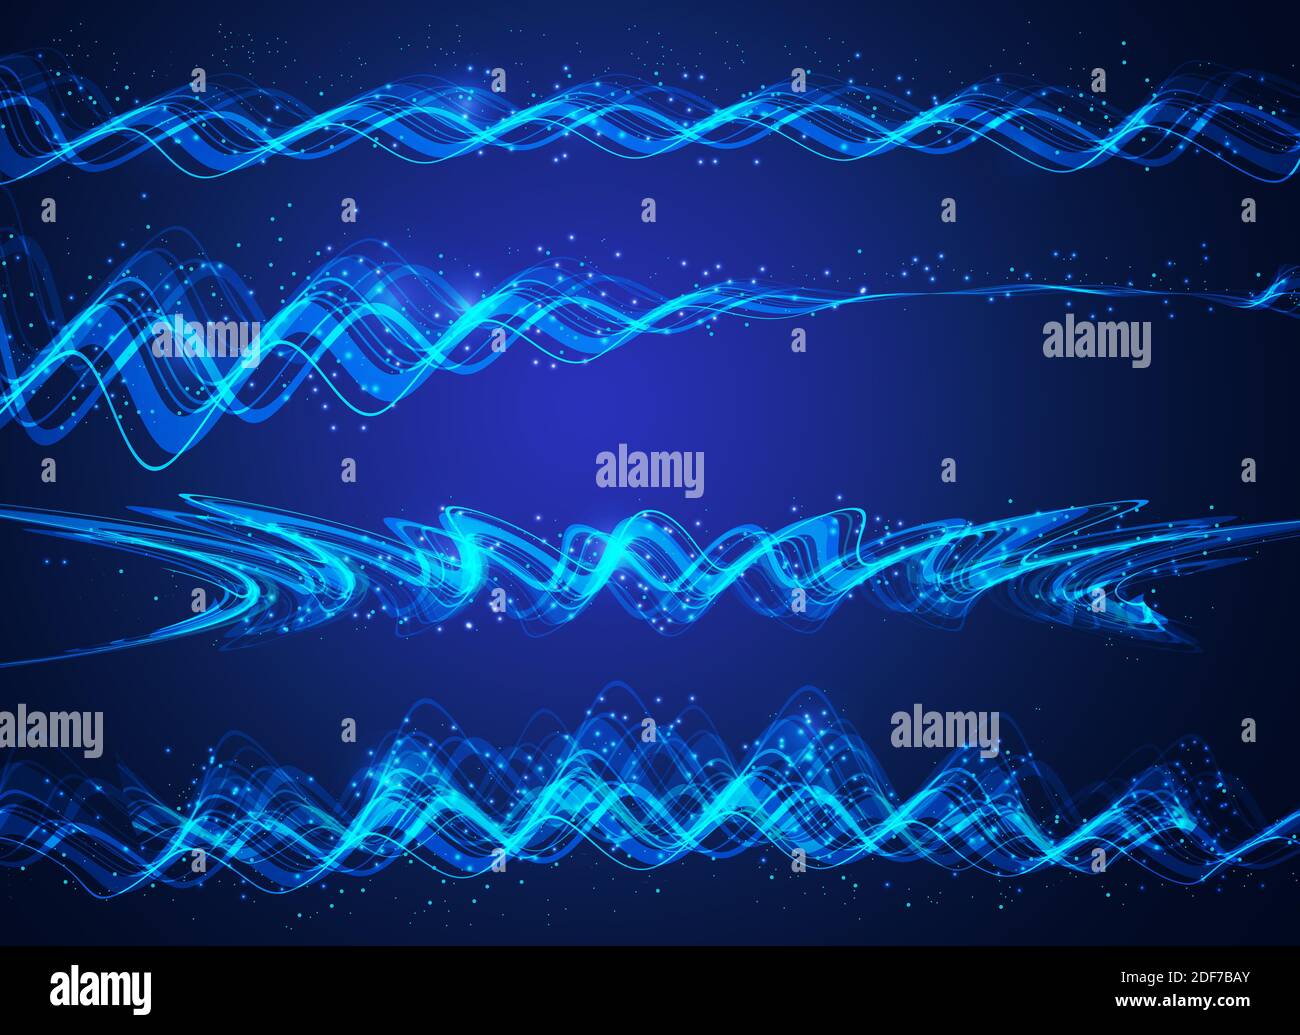 Wireframe of blue waves. Low poly digital vector illustration. Modern hi-tech graphic. Stock Photo